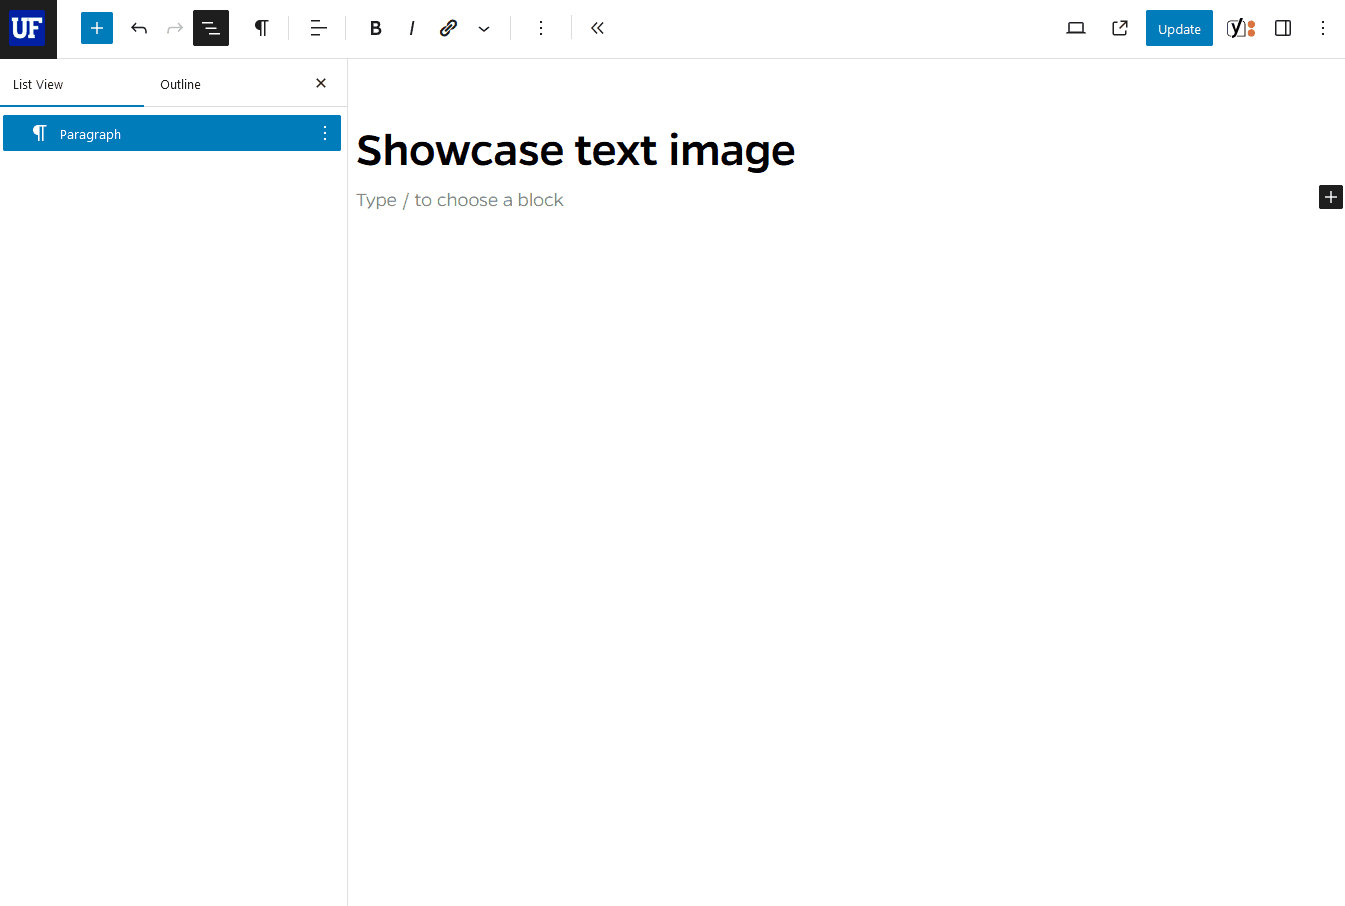 How to add a Showcase Text Image block in Mercury